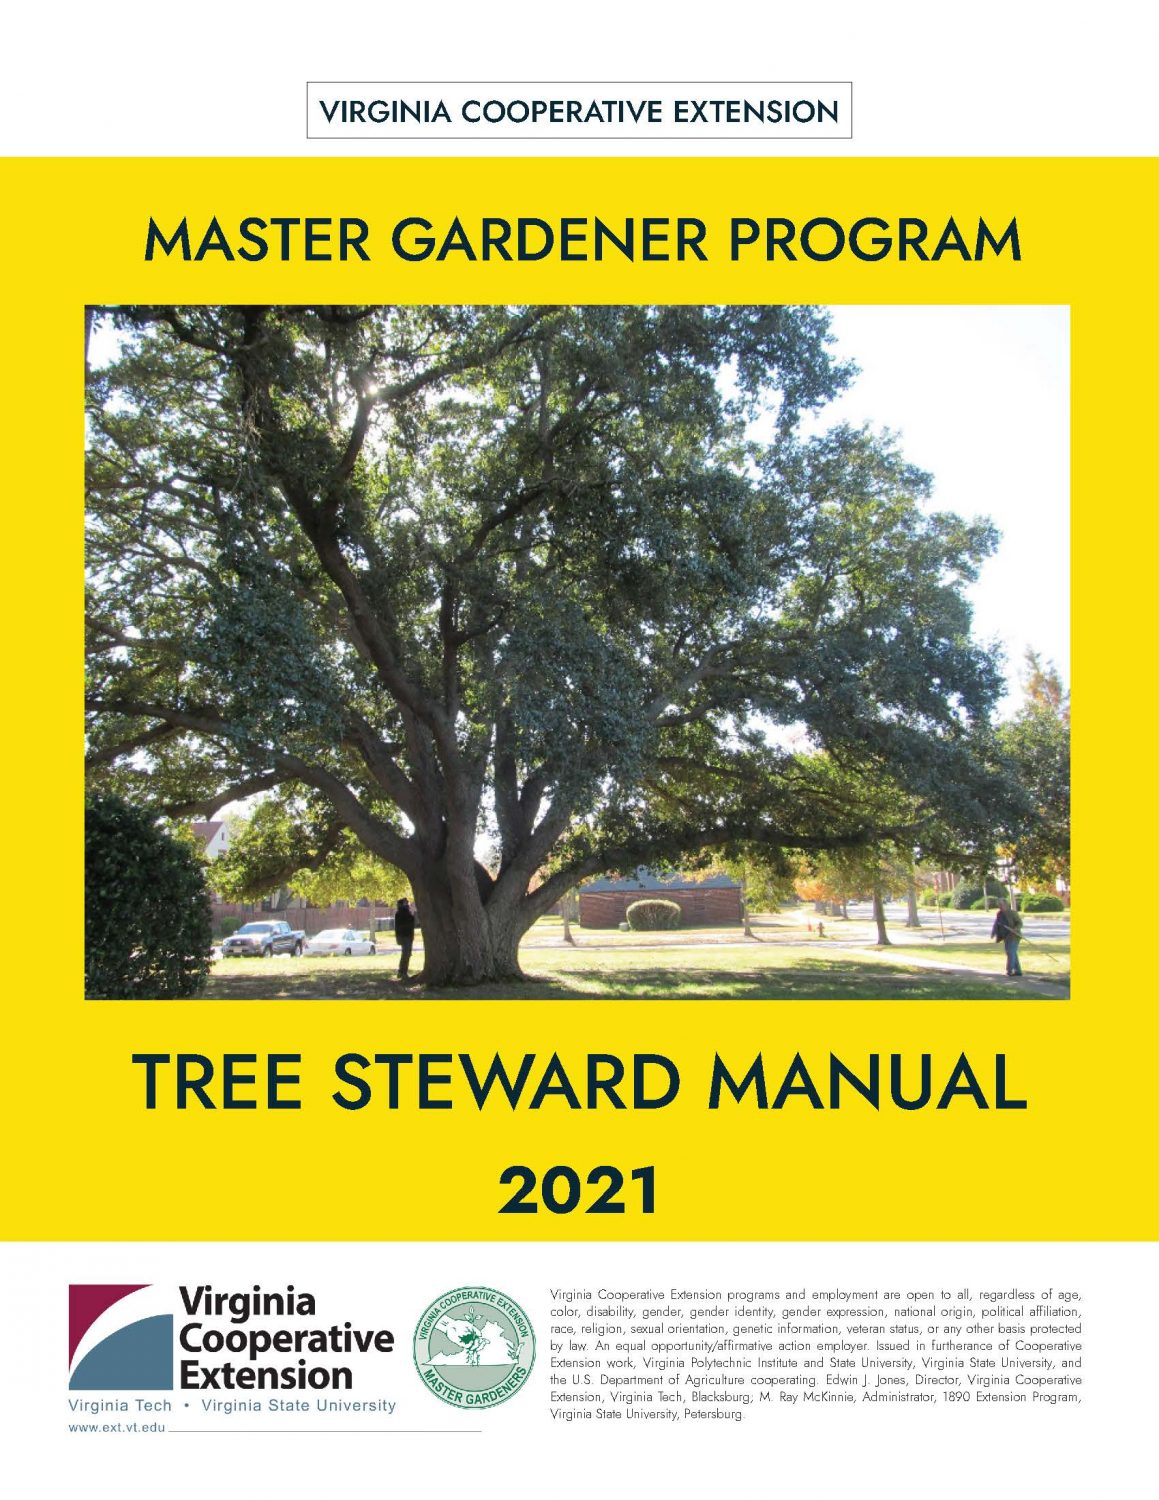 Cover image for Tree Steward Manual